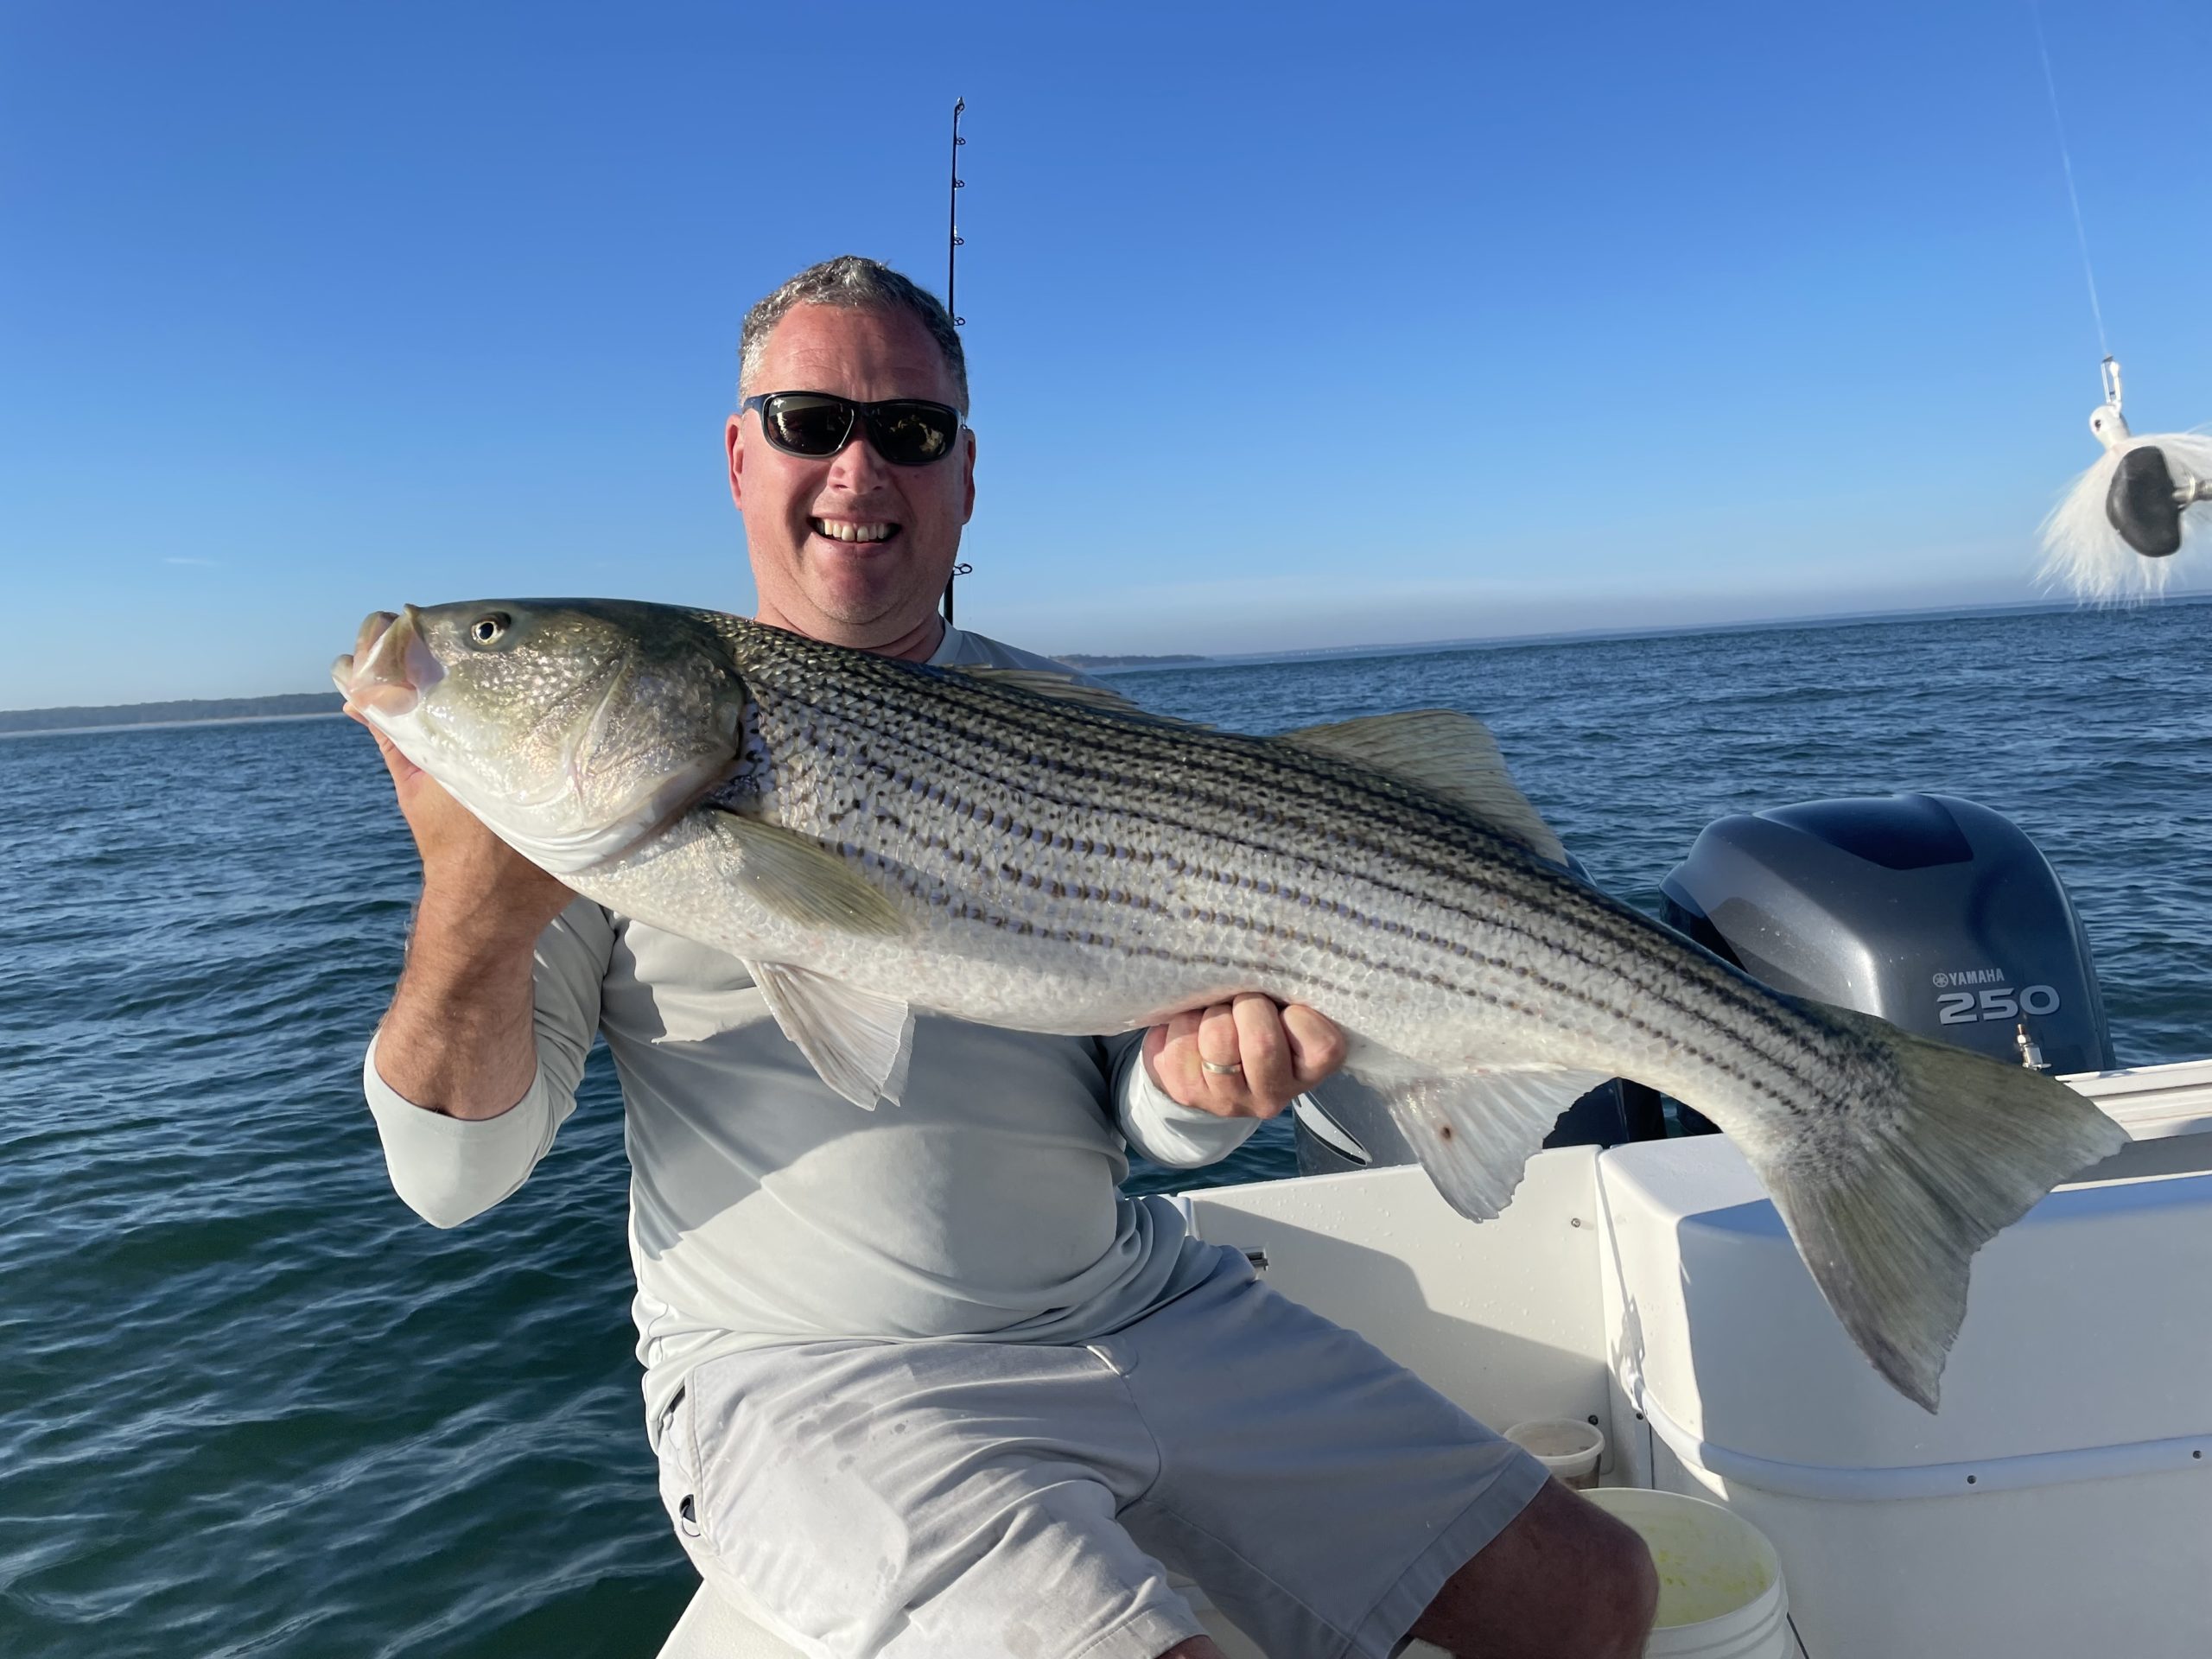 Anglers can offer input on the management of striped bass, like this one caught by Keith Robertson last summer, until April 15.